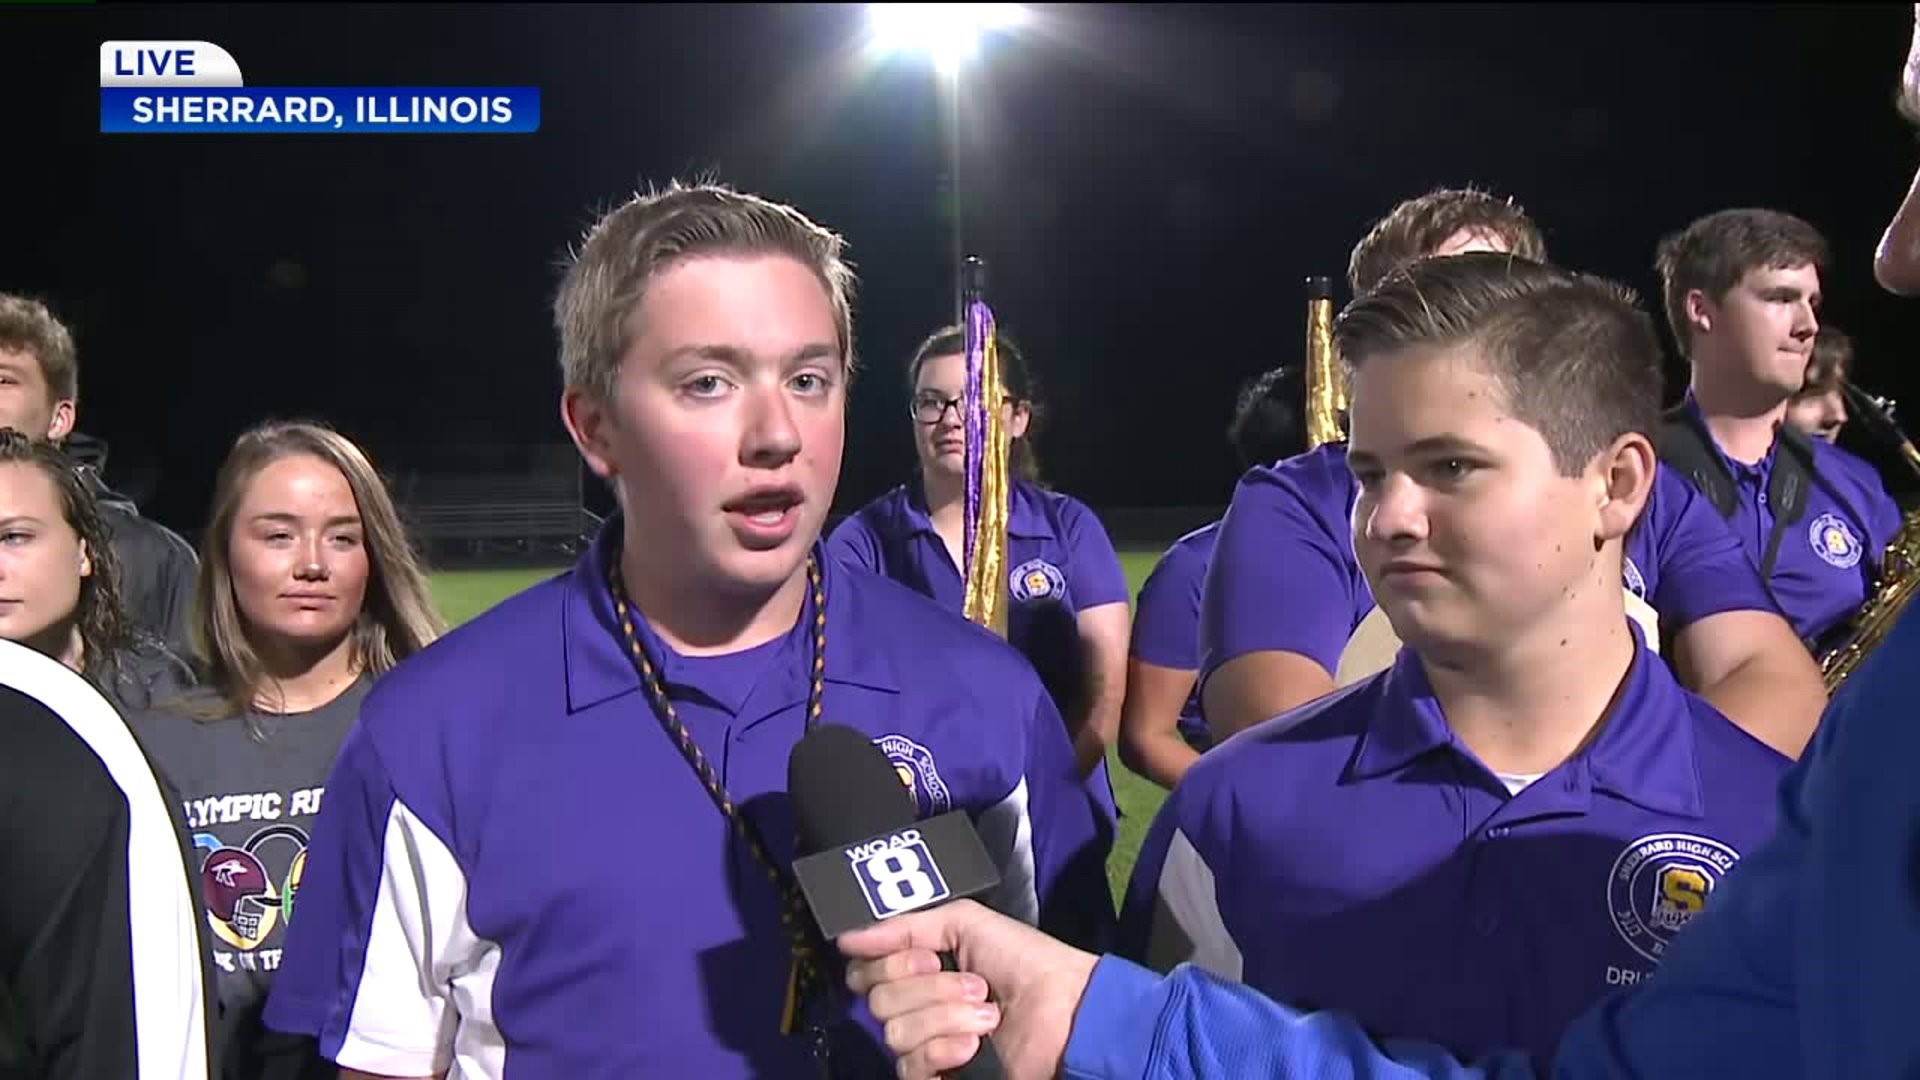 Sherrard Students Talk About Excitement of Week 1